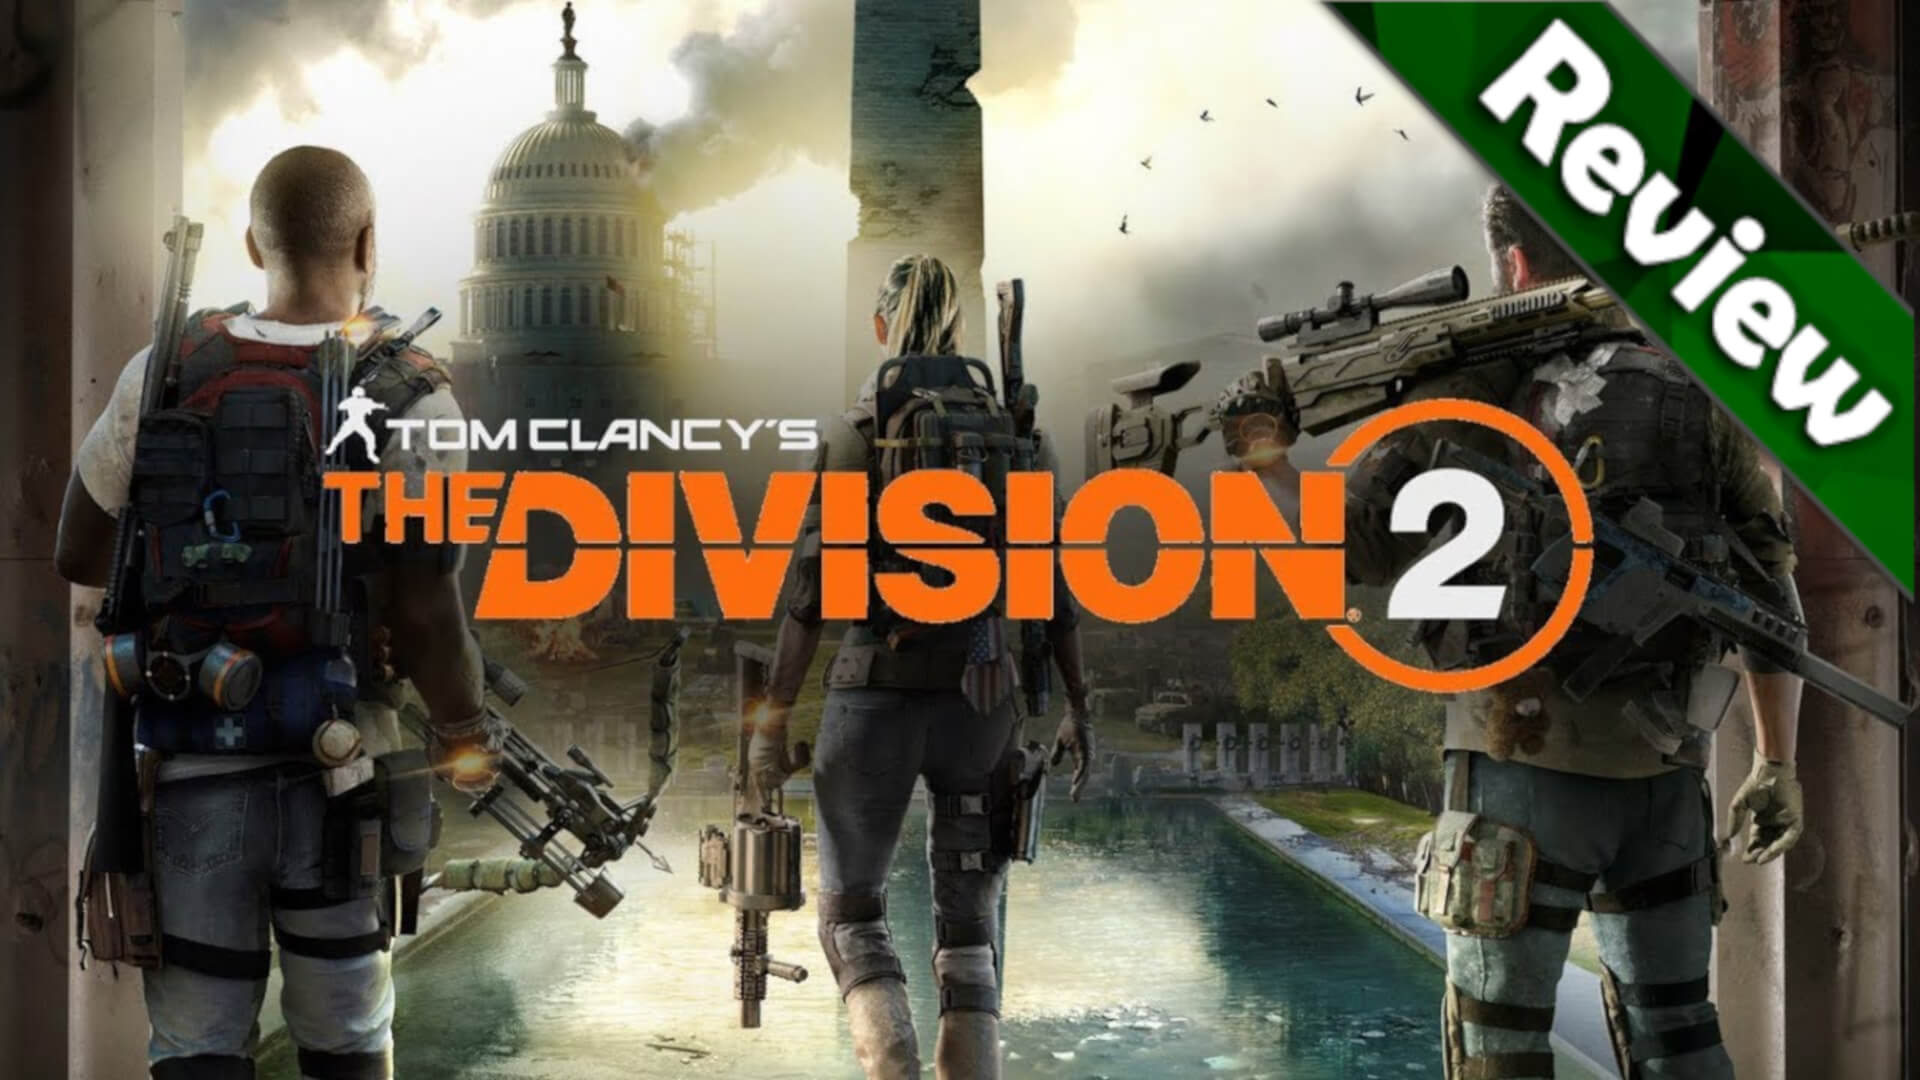 der ovre systematisk tolerance Tom Clancy's The Division 2 Review